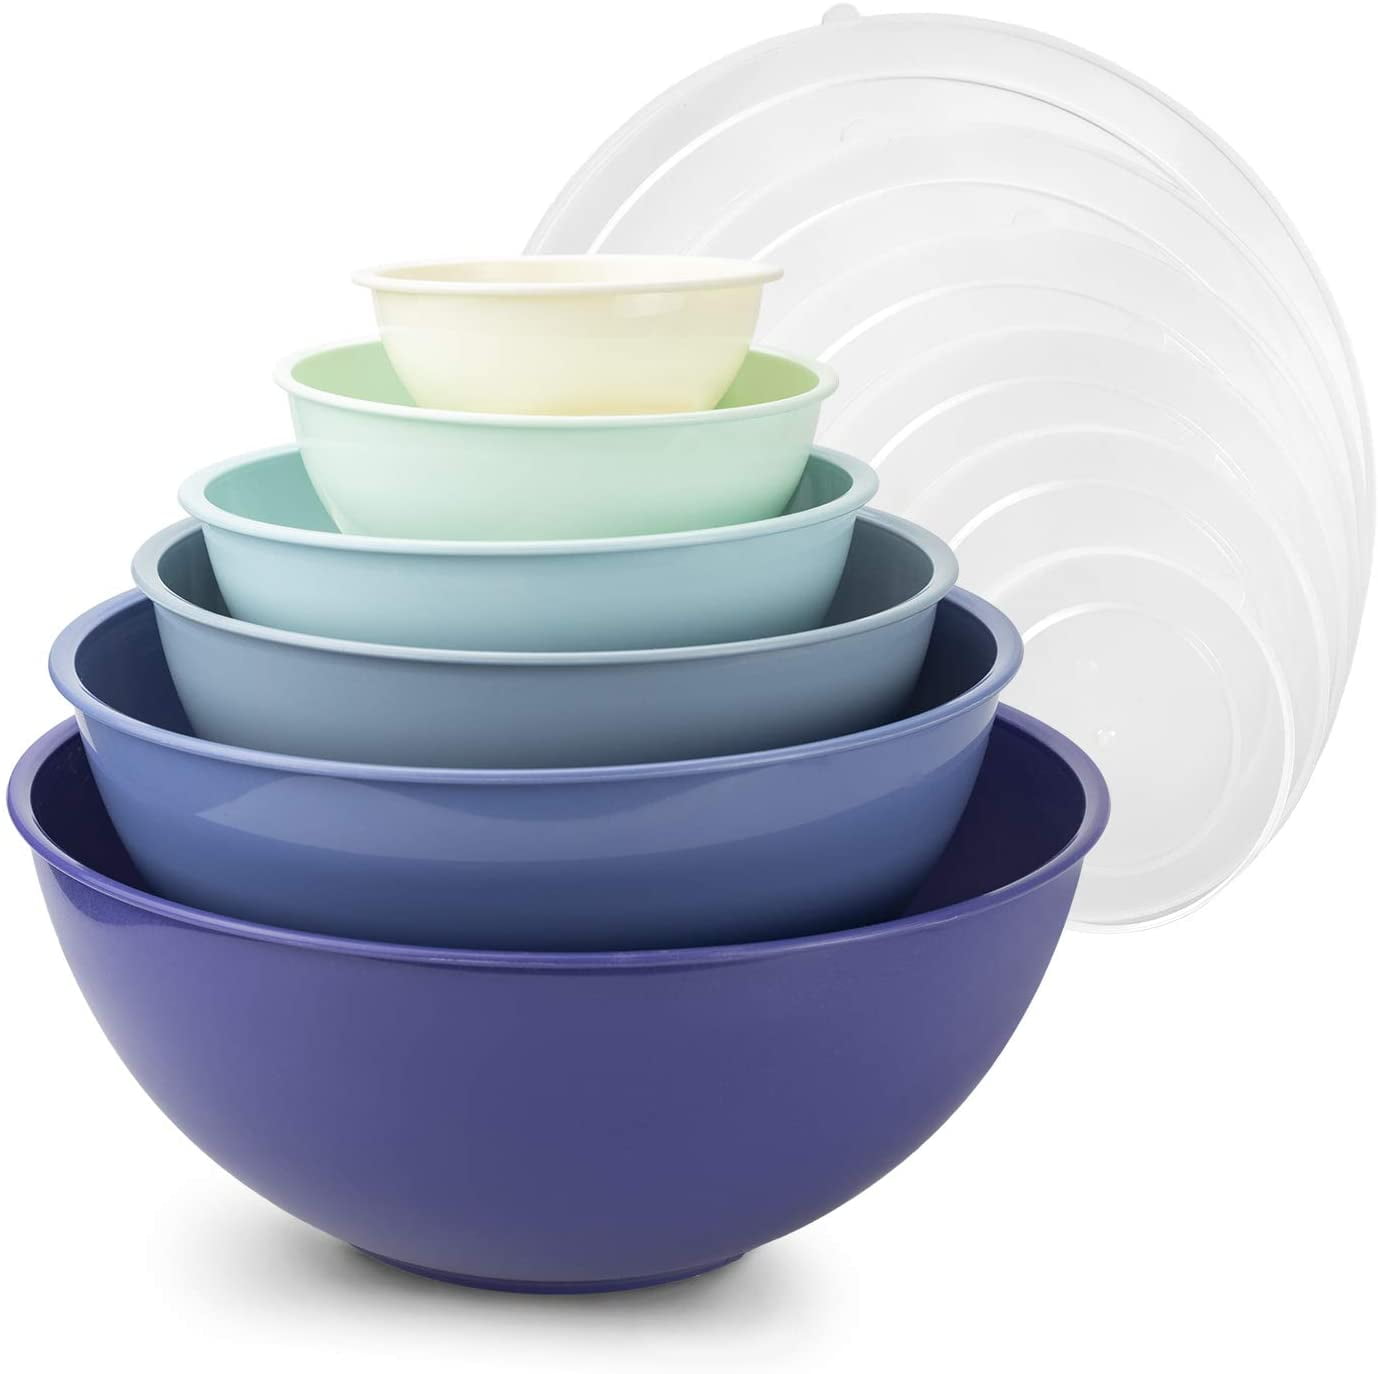 Serving Dishes Ideal for Cereals Soup DeeCoo 5 Pcs Ceramic Mixing Serving Bowls Set Ice Cream Dessert Microwave Safe Large Mixing Bowls White Serving Bowls